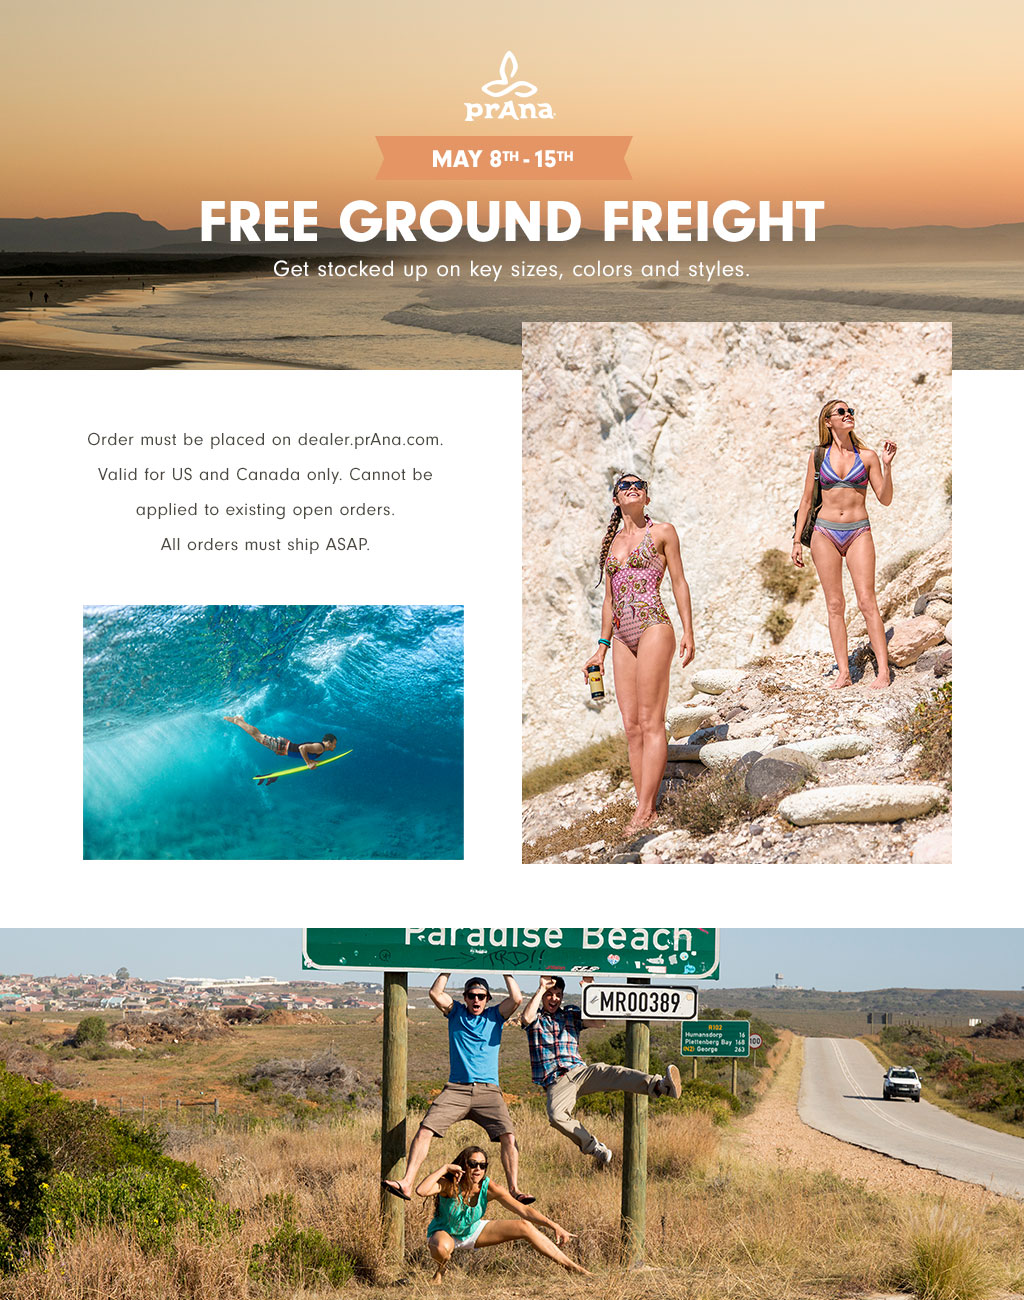 Prana Dealers - free ground freight on orders placed between May 8 - 15, 2017.